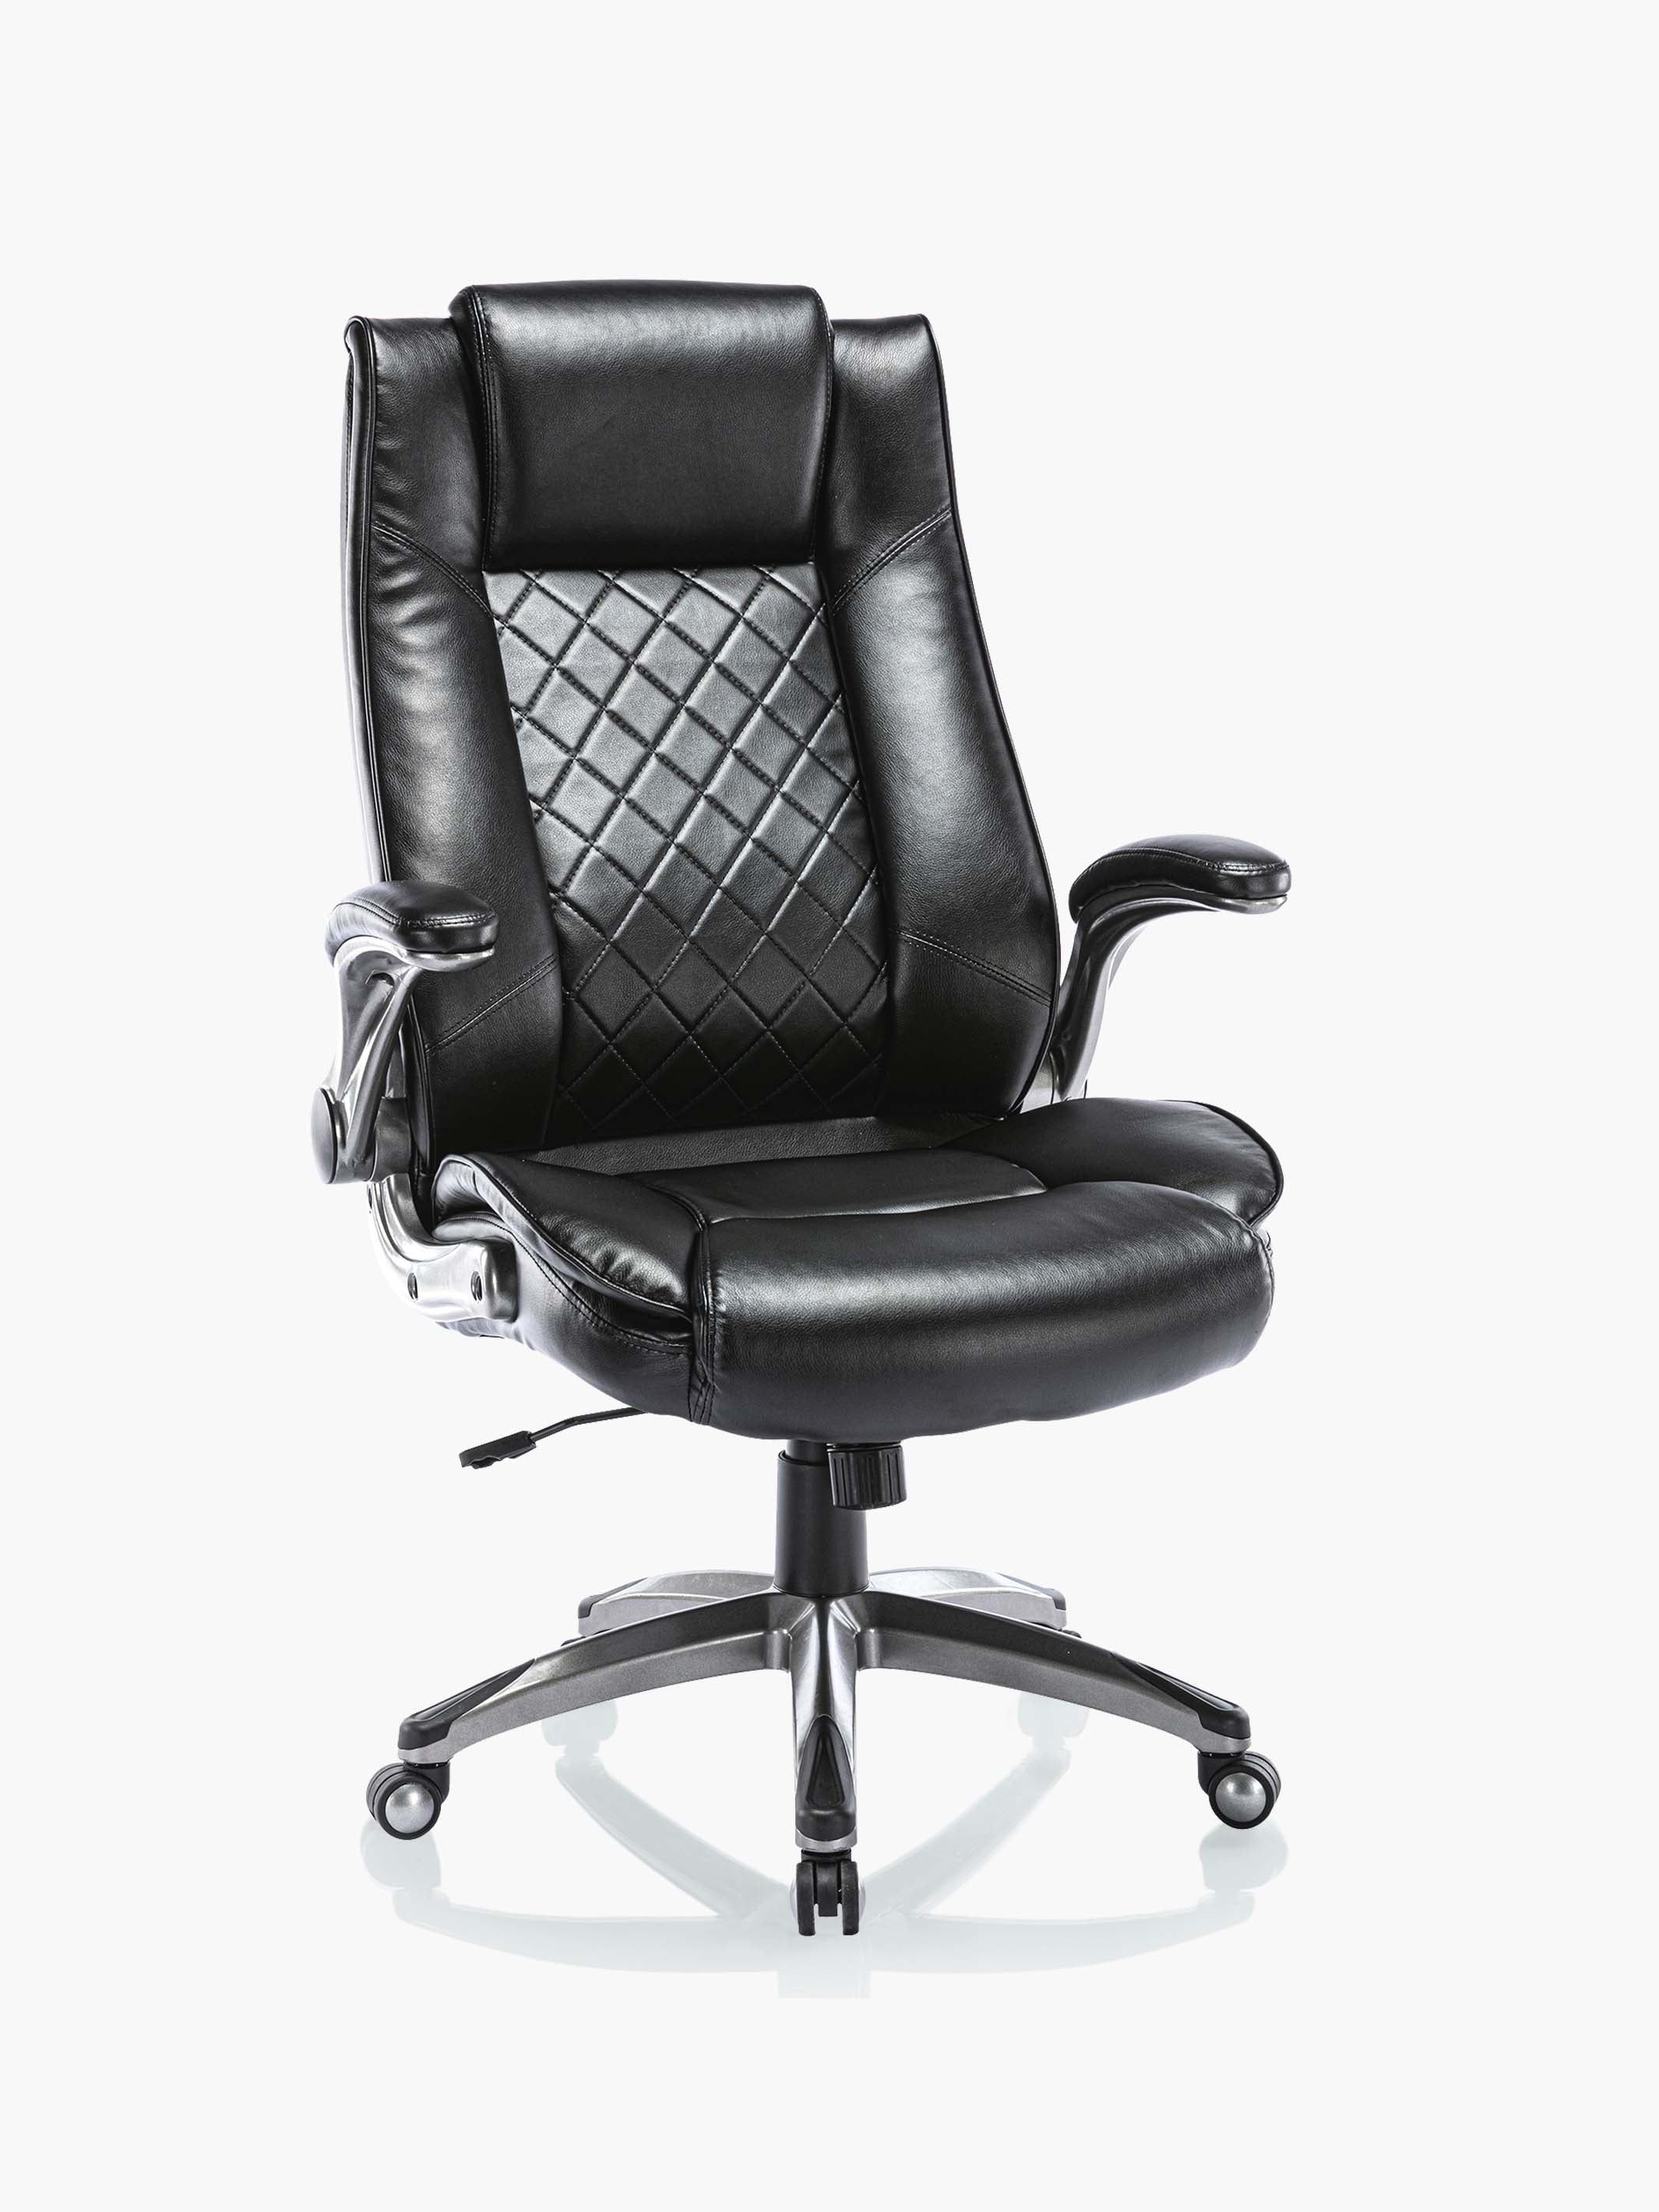 COLAMY Ergonomic High Back Leather Office Chair with Flip Up Armrests DM2199 Diamond Pattern #color_black